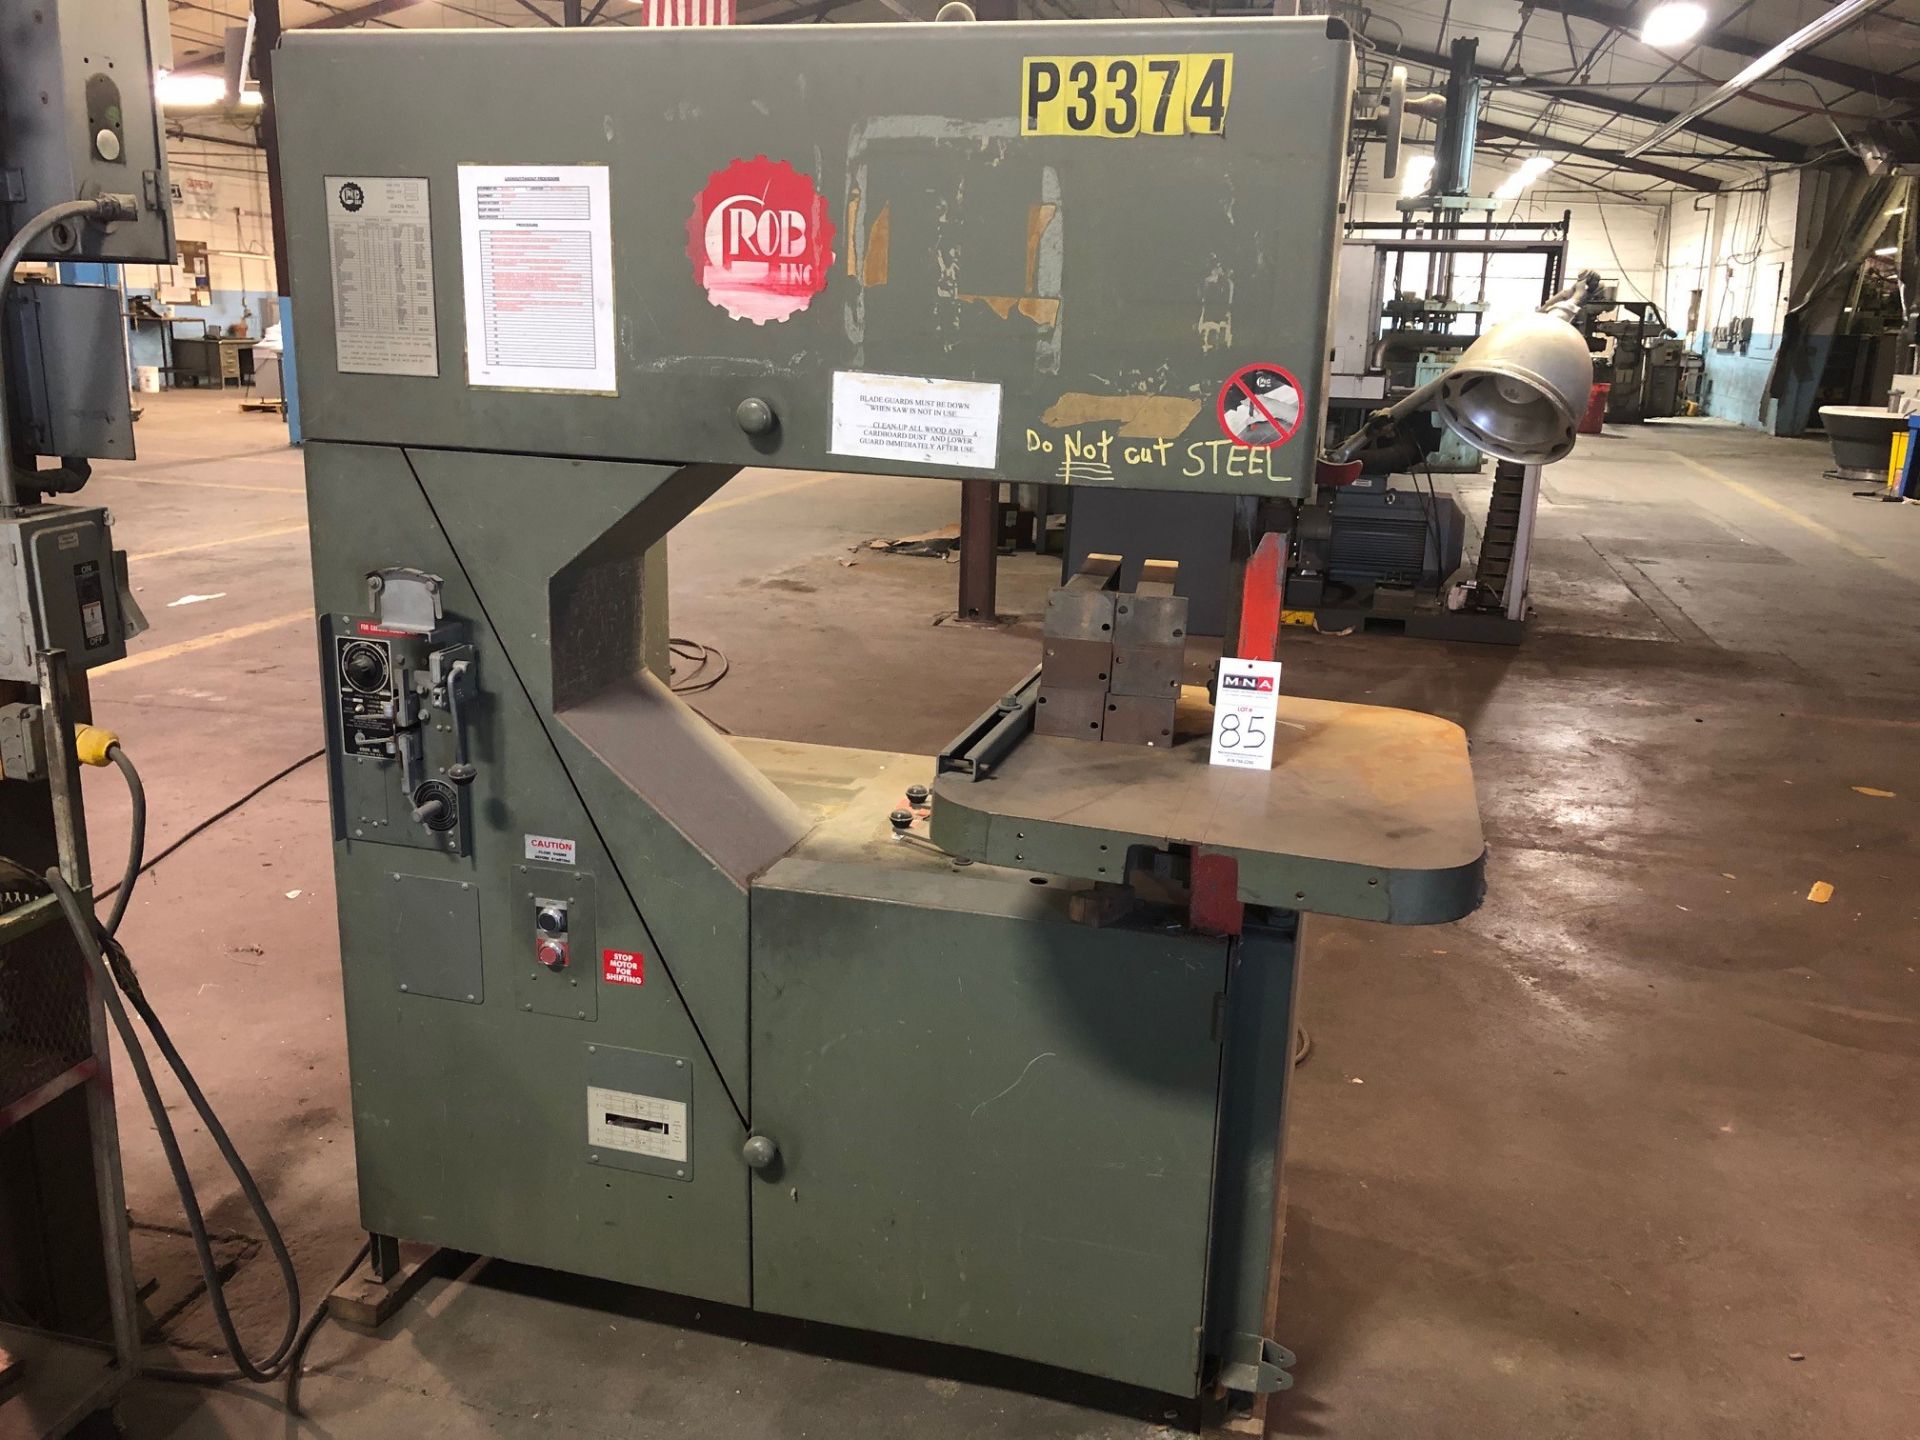 Grob Model 4V-36 36" Vertical Band Saw, S/N 1828, (1994); with 28" x 24" Worktable; and Grob Model